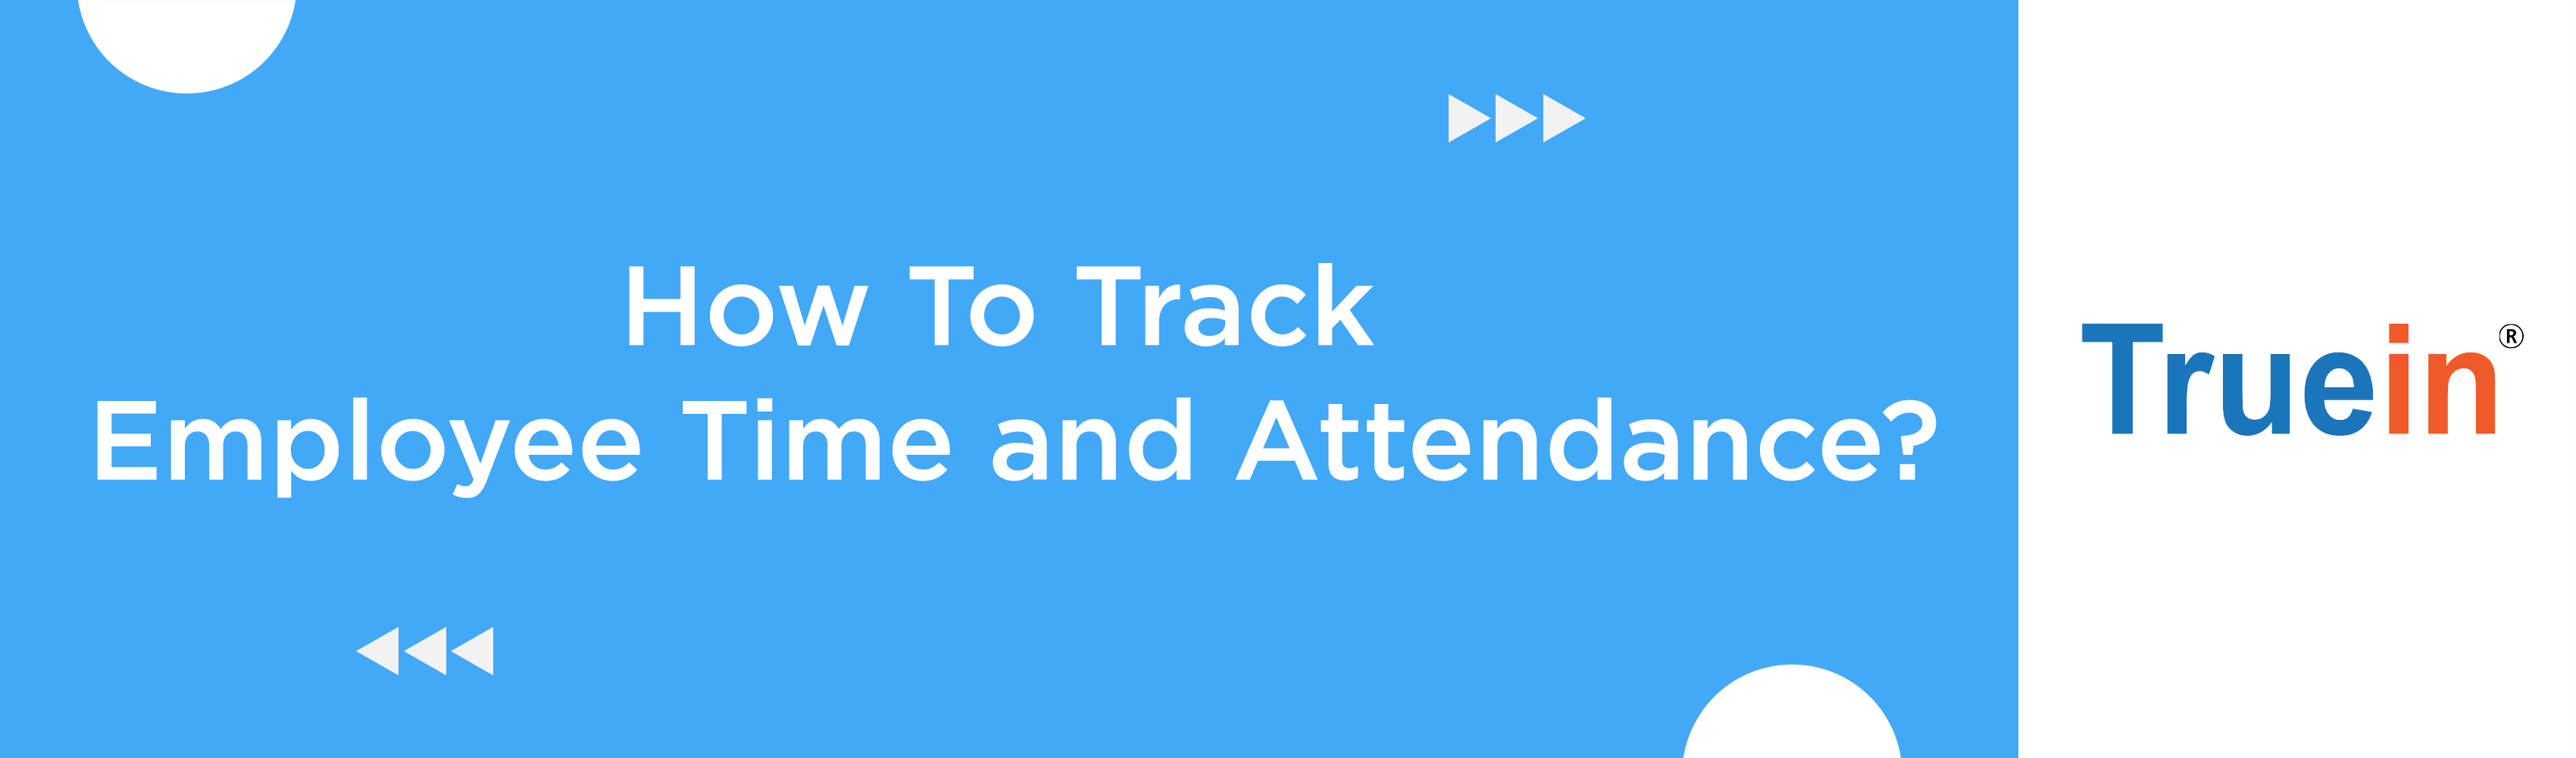 How To Track Employee Time and Attendance?